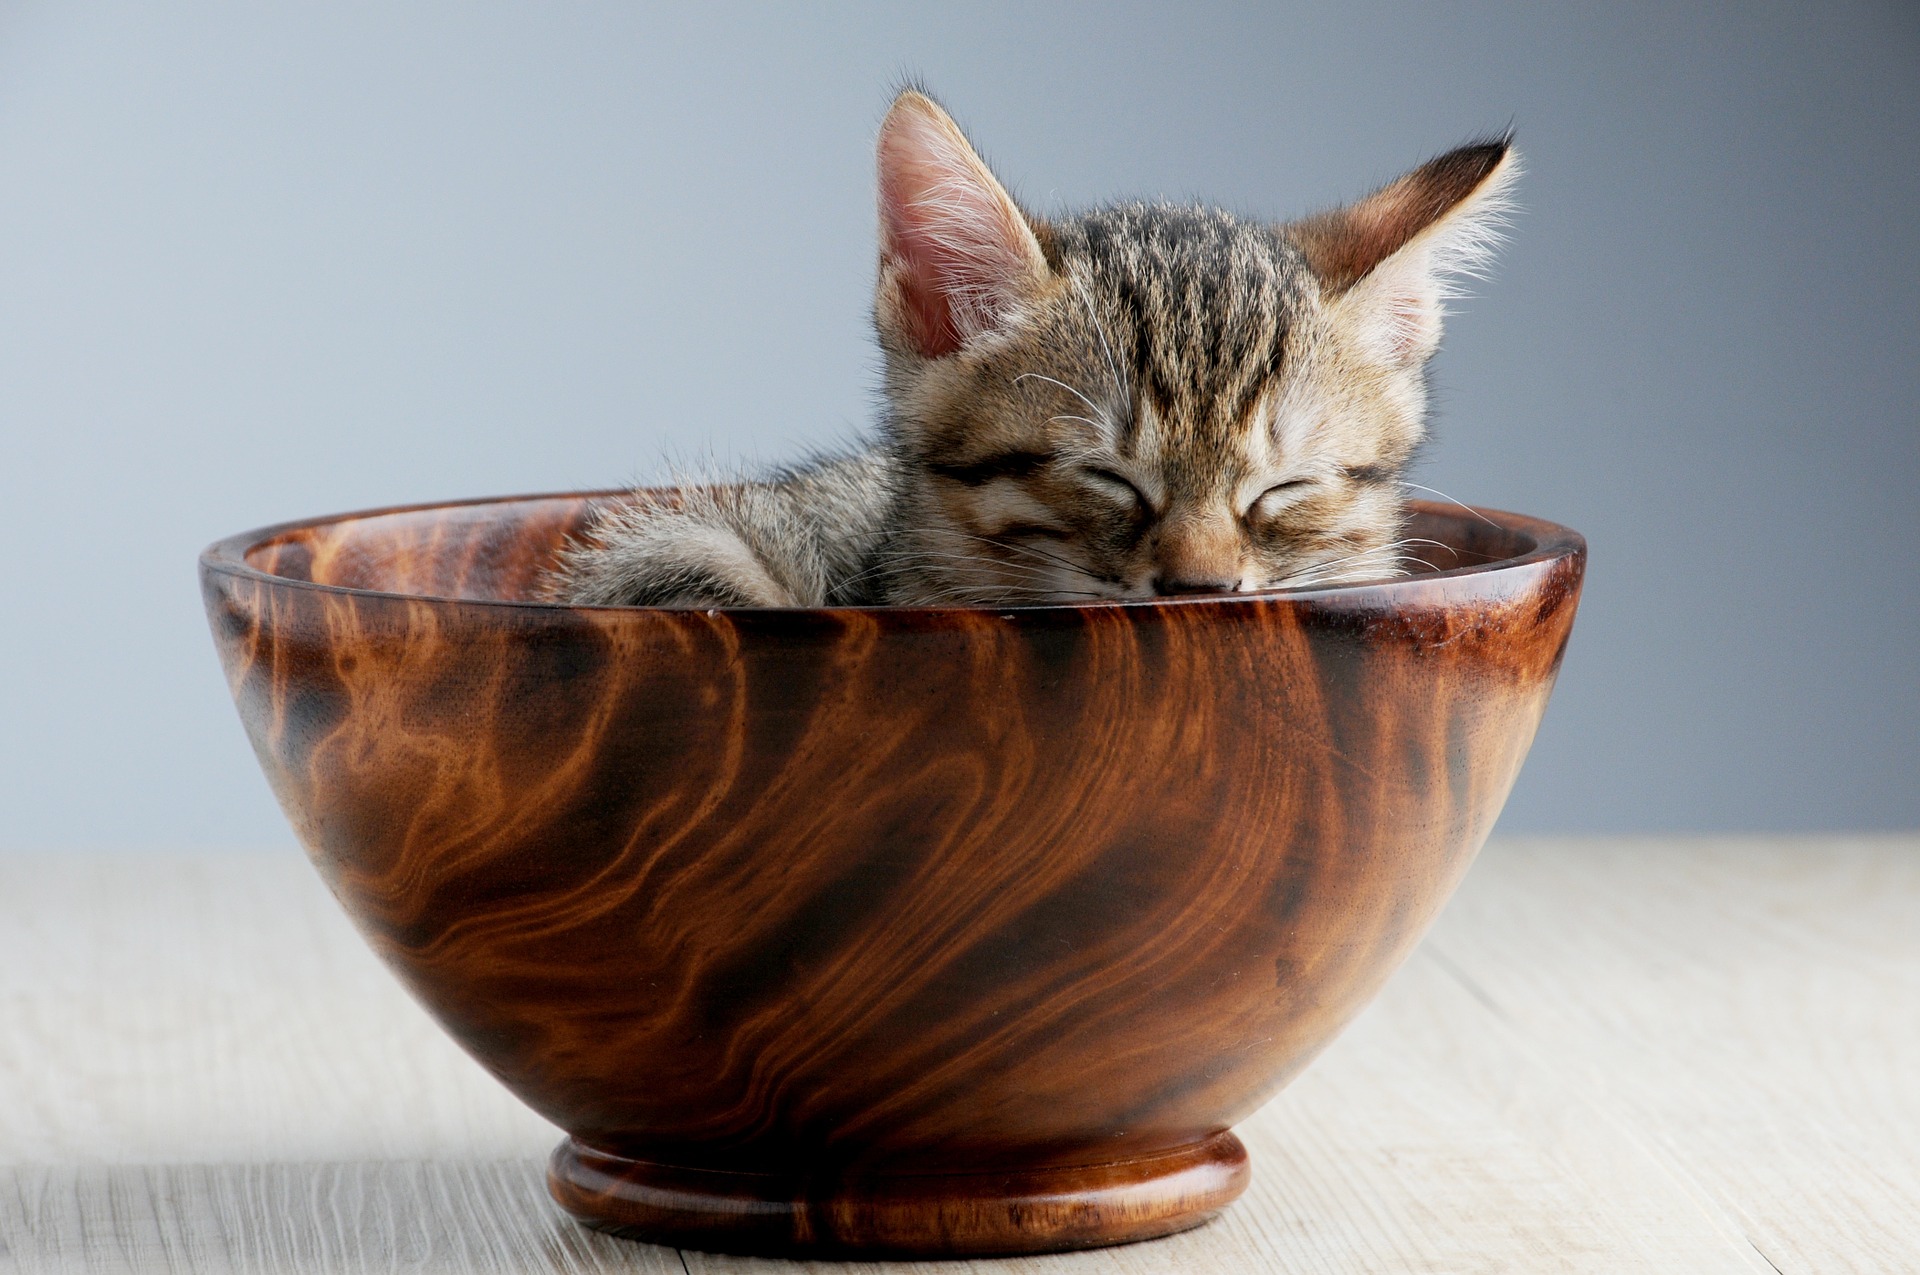 Keeping Your Pet's Bowls Clean